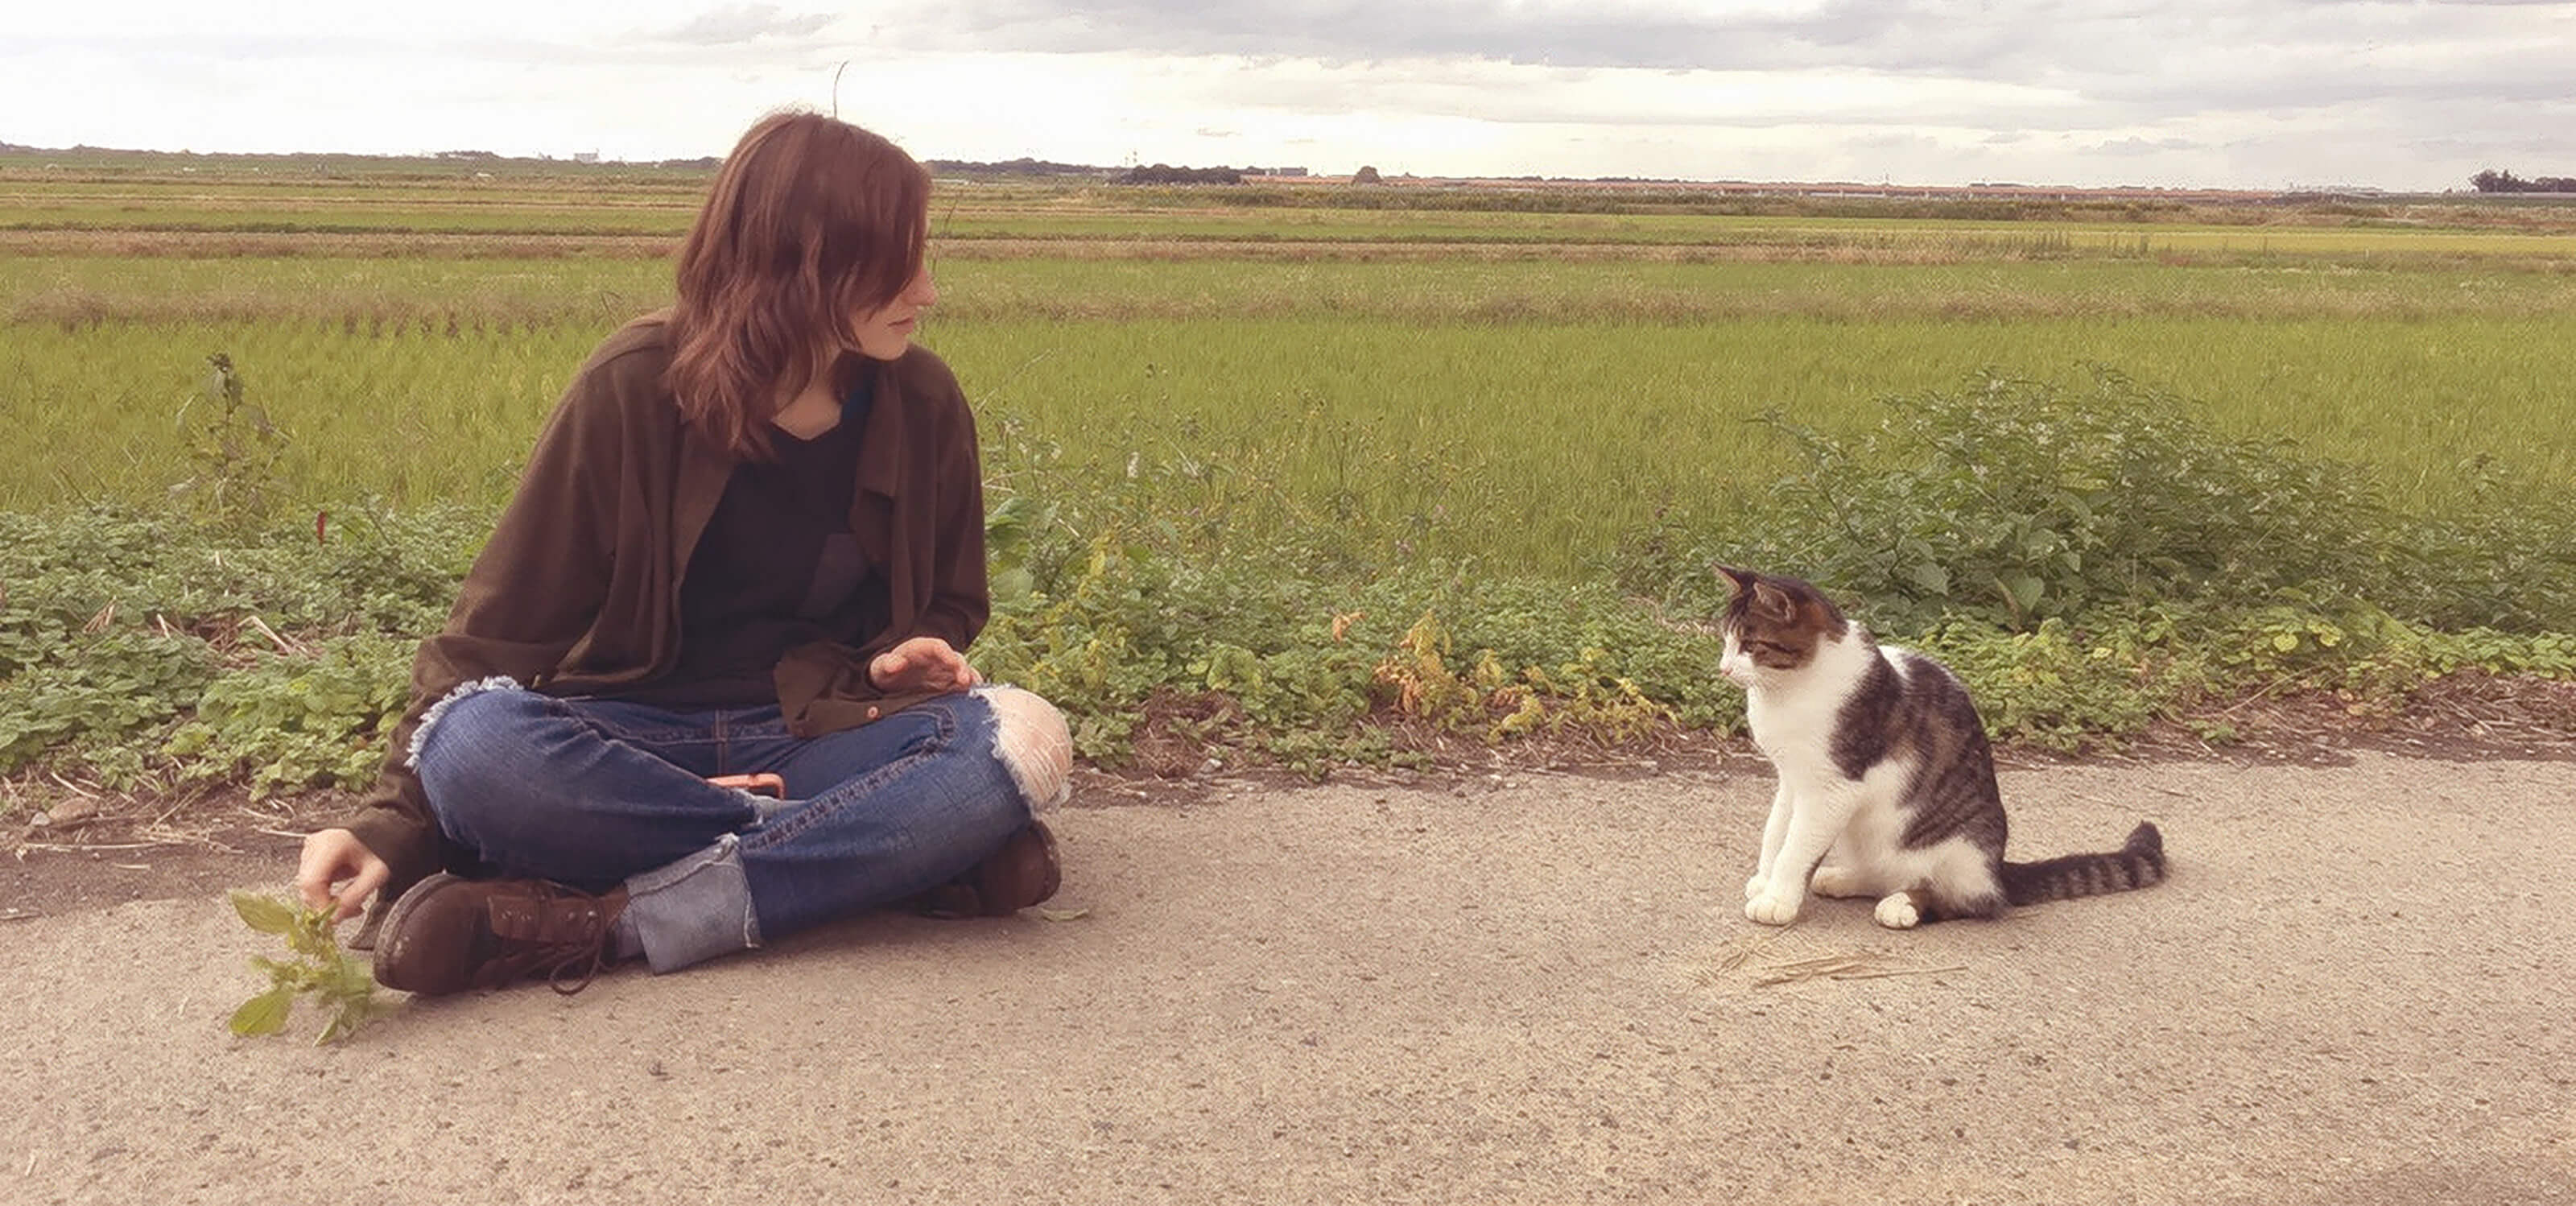 DigiPen alumna Heather Gross sitting on a dirt road in Japan, trying to coax a cat to come over to her